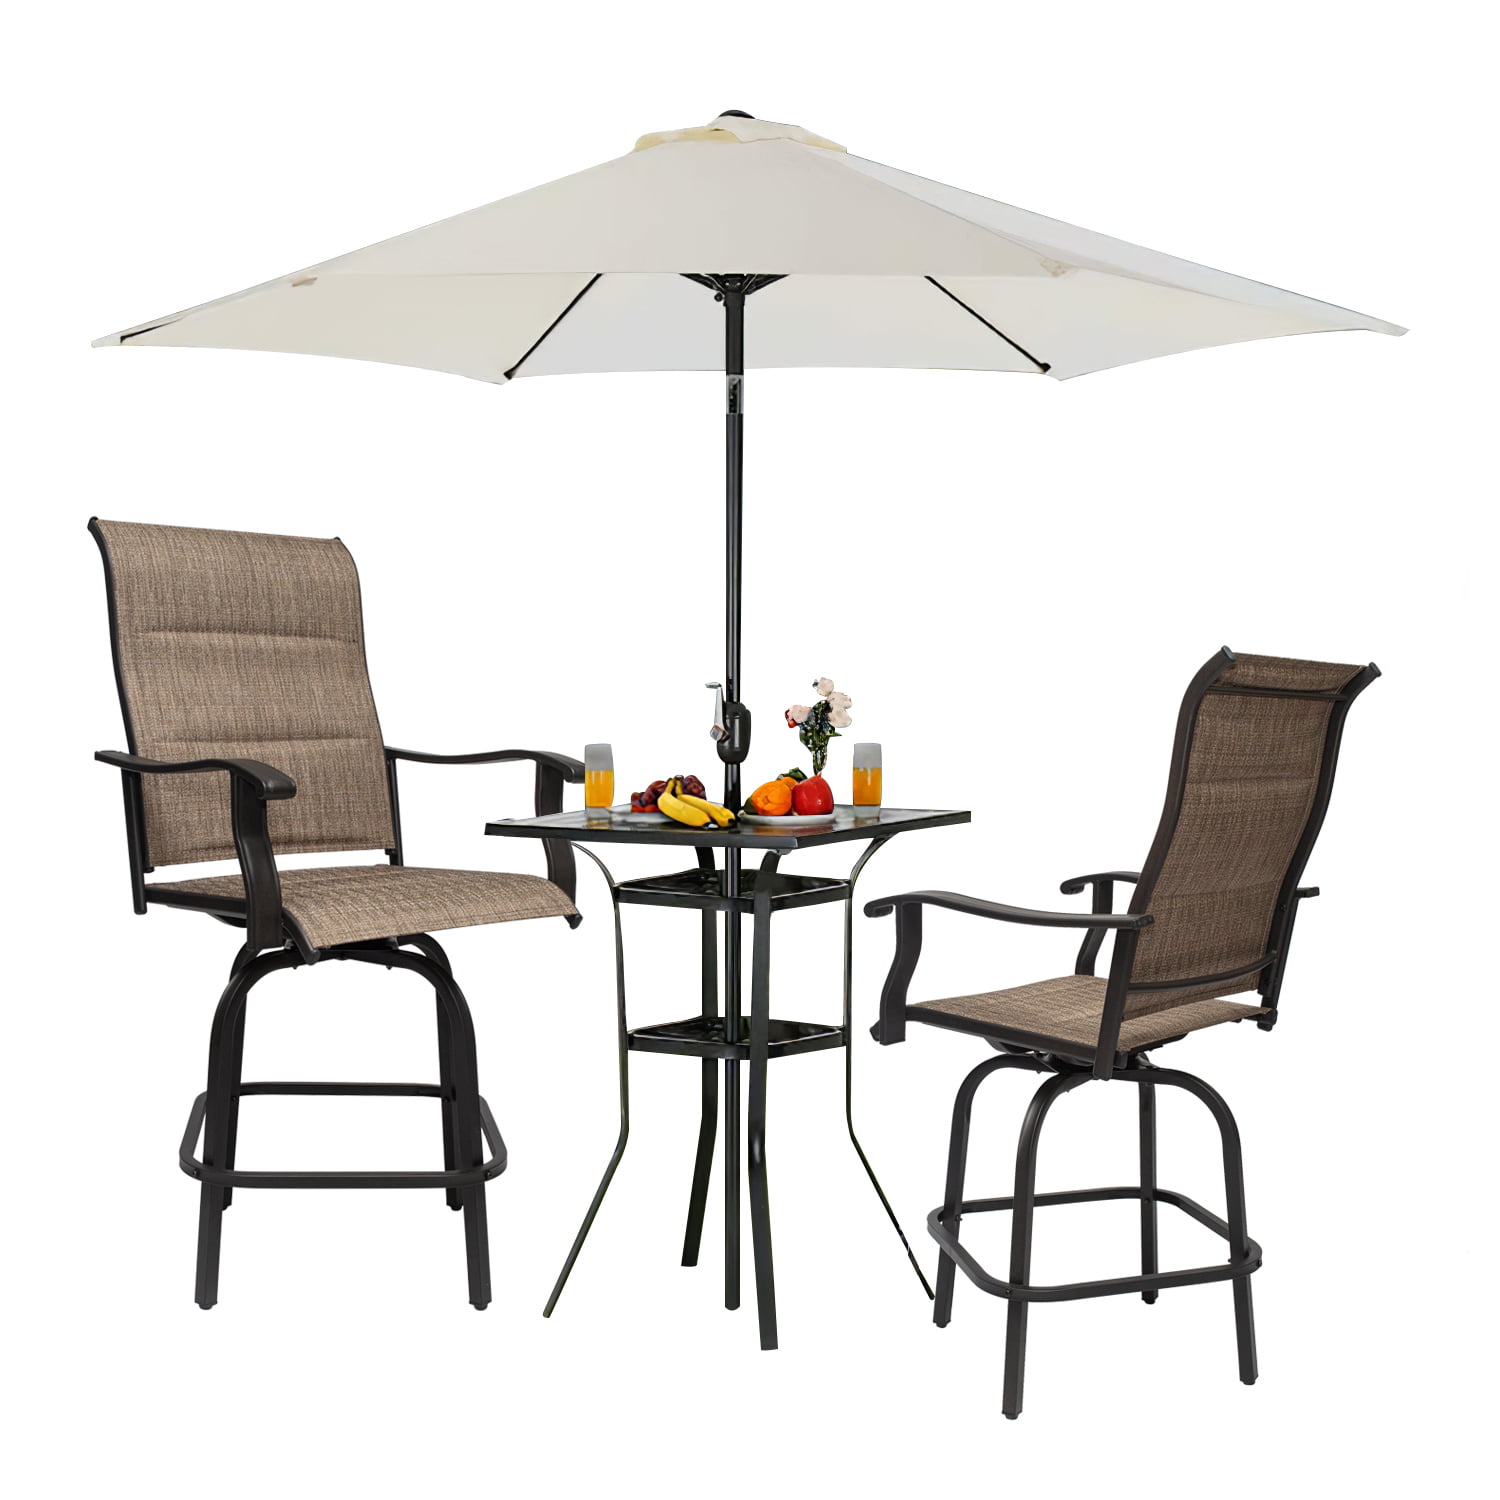 Outdoor Bar Height Patio Furniture, Bar Height Outdoor Table With Umbrella Hole